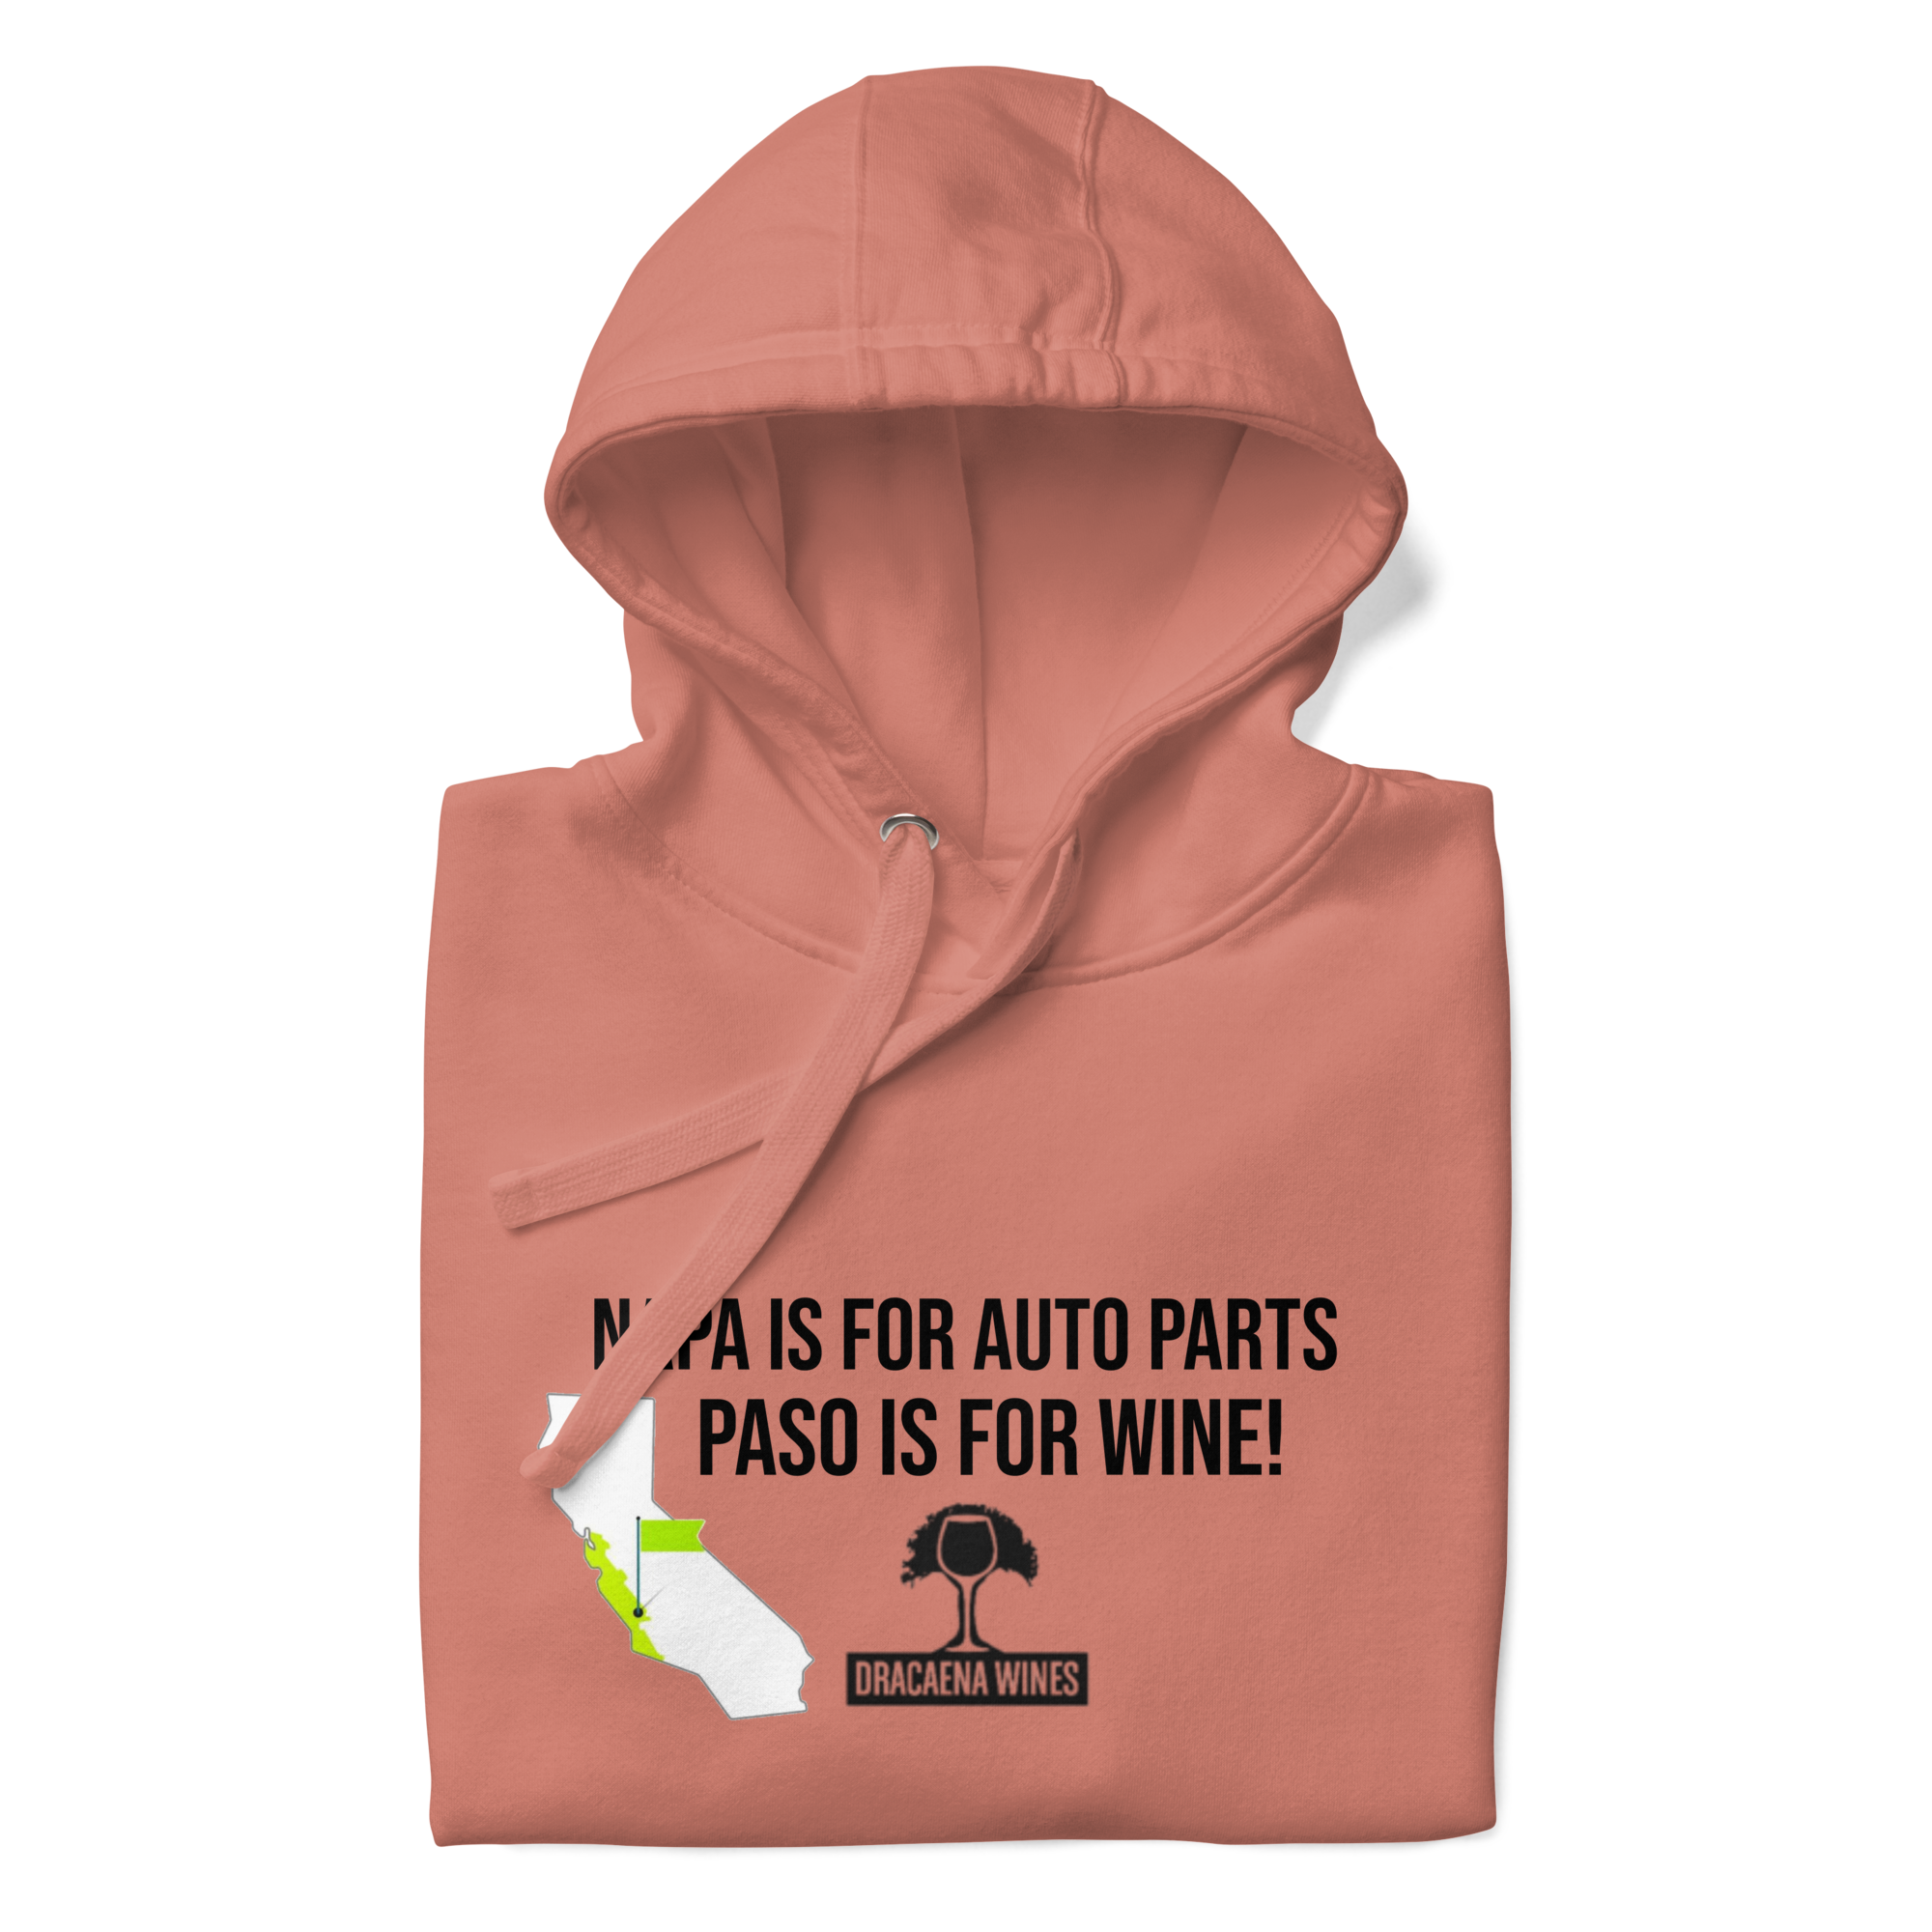 hoodie with napa is for auto parts across the chest